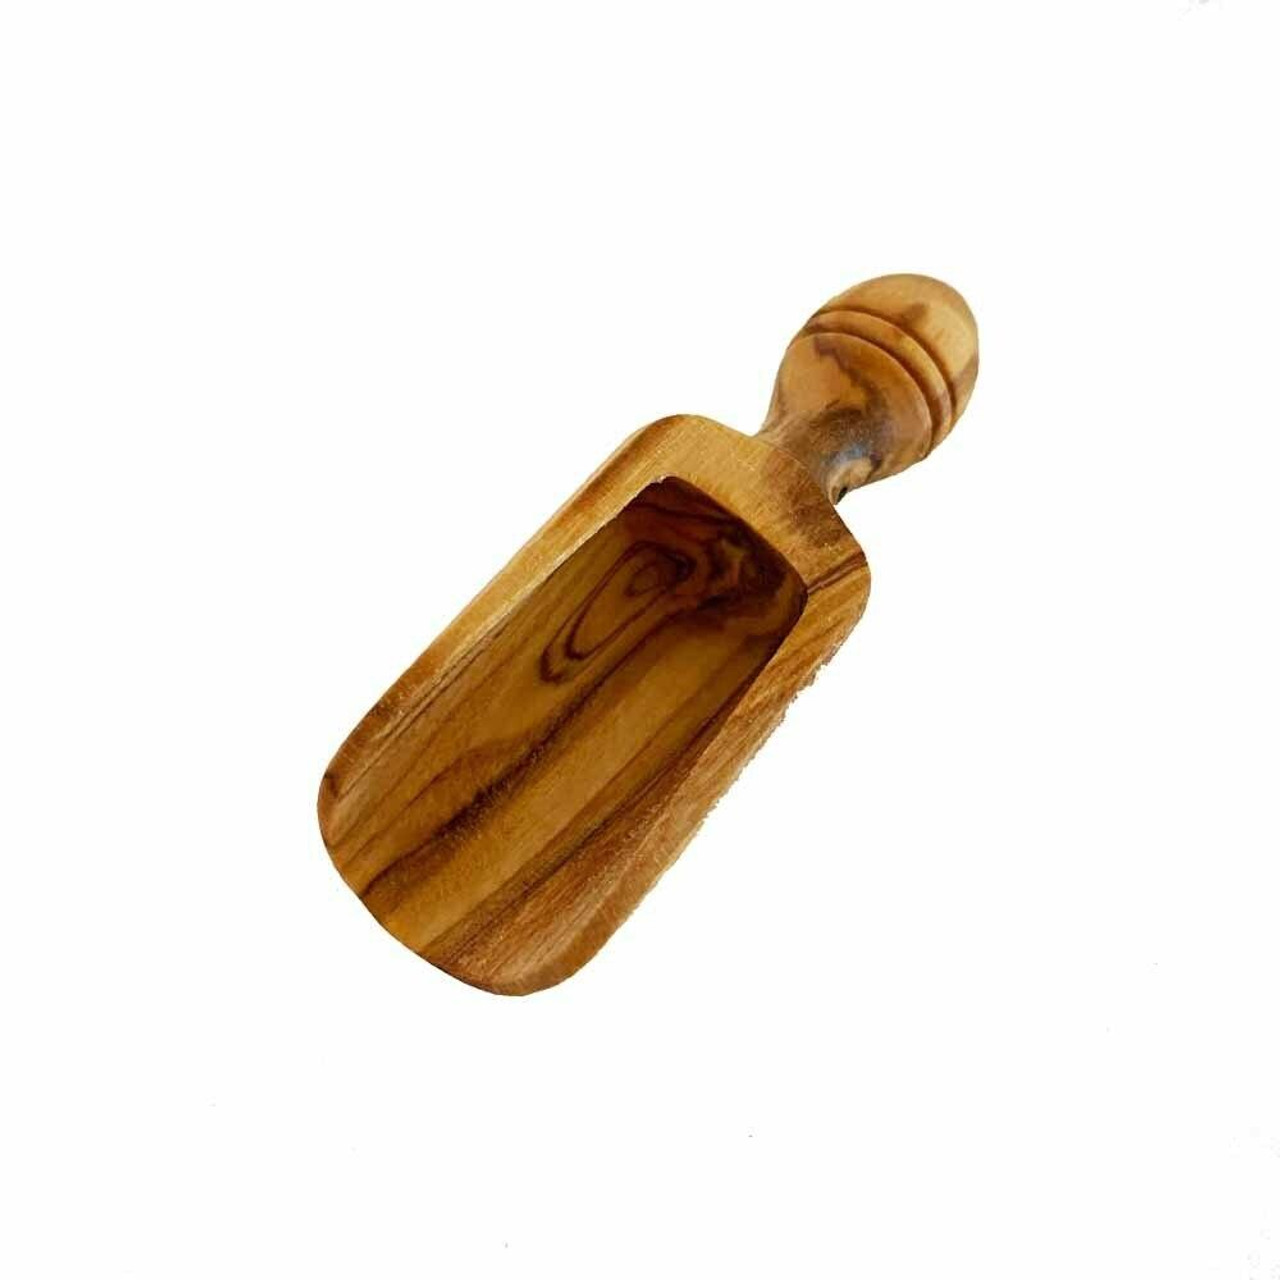 https://cdn11.bigcommerce.com/s-pa7lxgfduc/images/stencil/1280x1280/products/373/1209/marnamaria-spices-and-herbs-olive-wood-mini-scoop-spoon__13577.1648694561.jpg?c=1